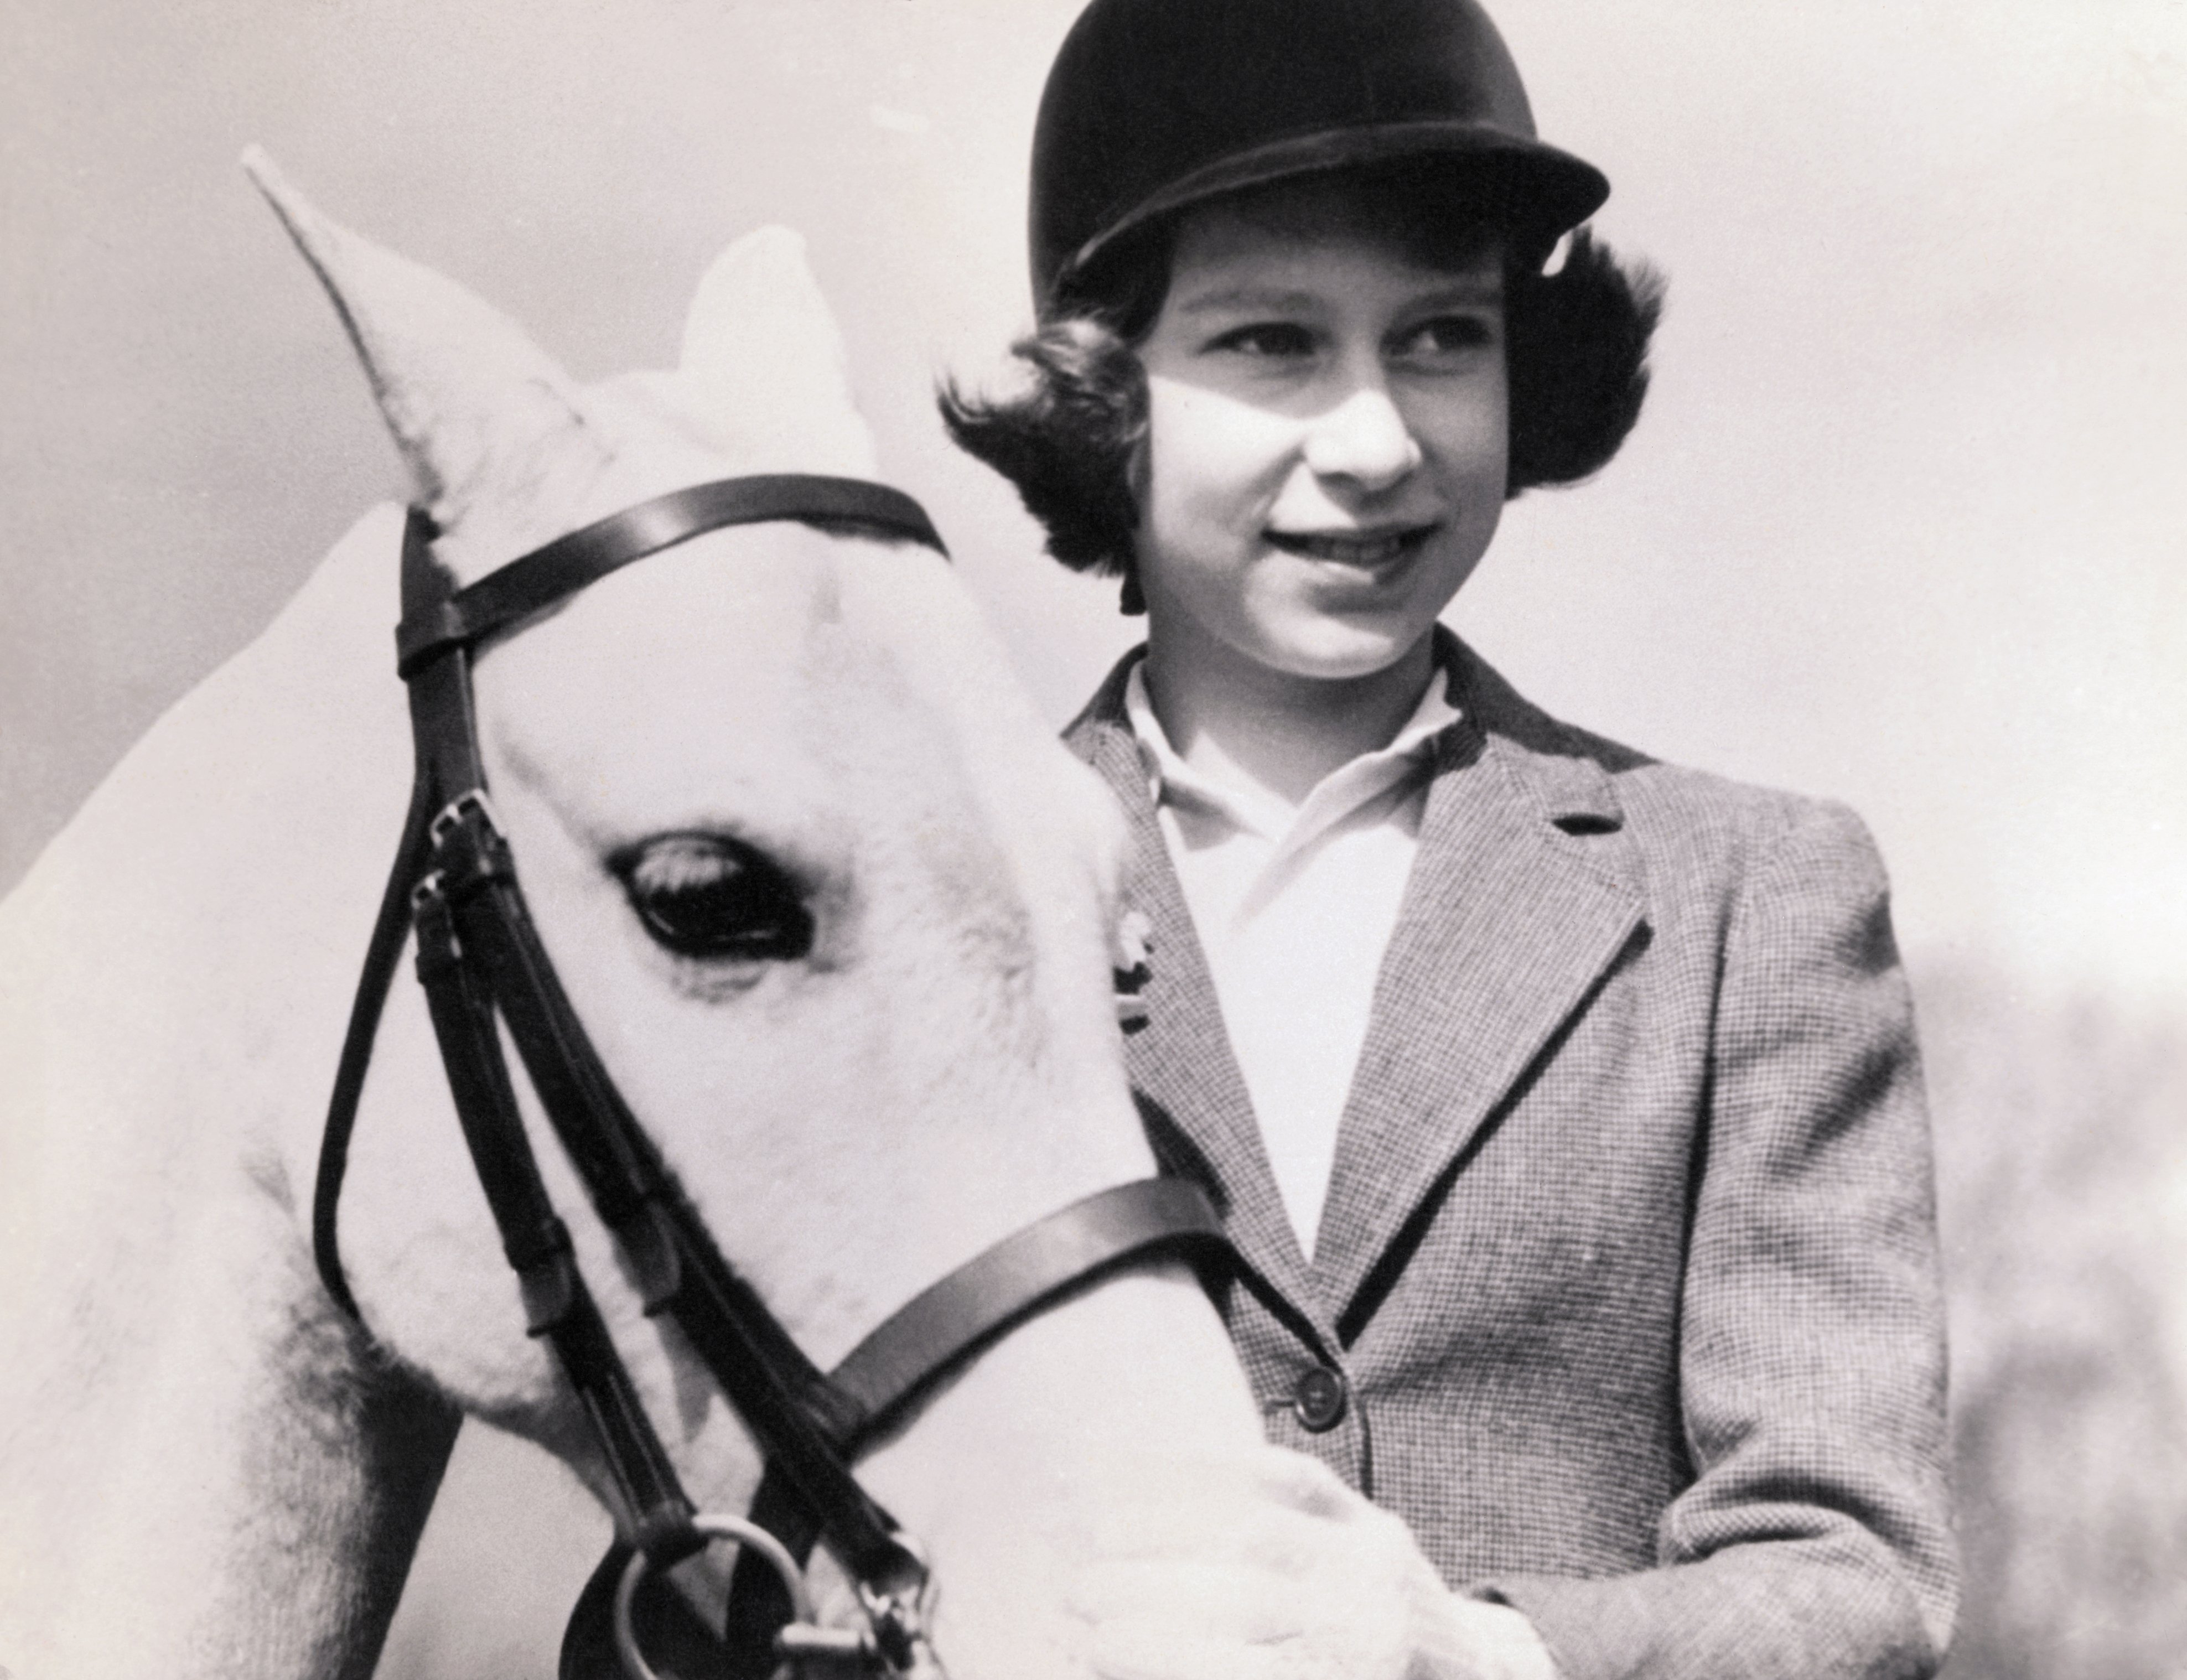 Crown Princess Elizabeth of Great Britain, later Queen Elizabeth II, with her pony | Source: Getty Images